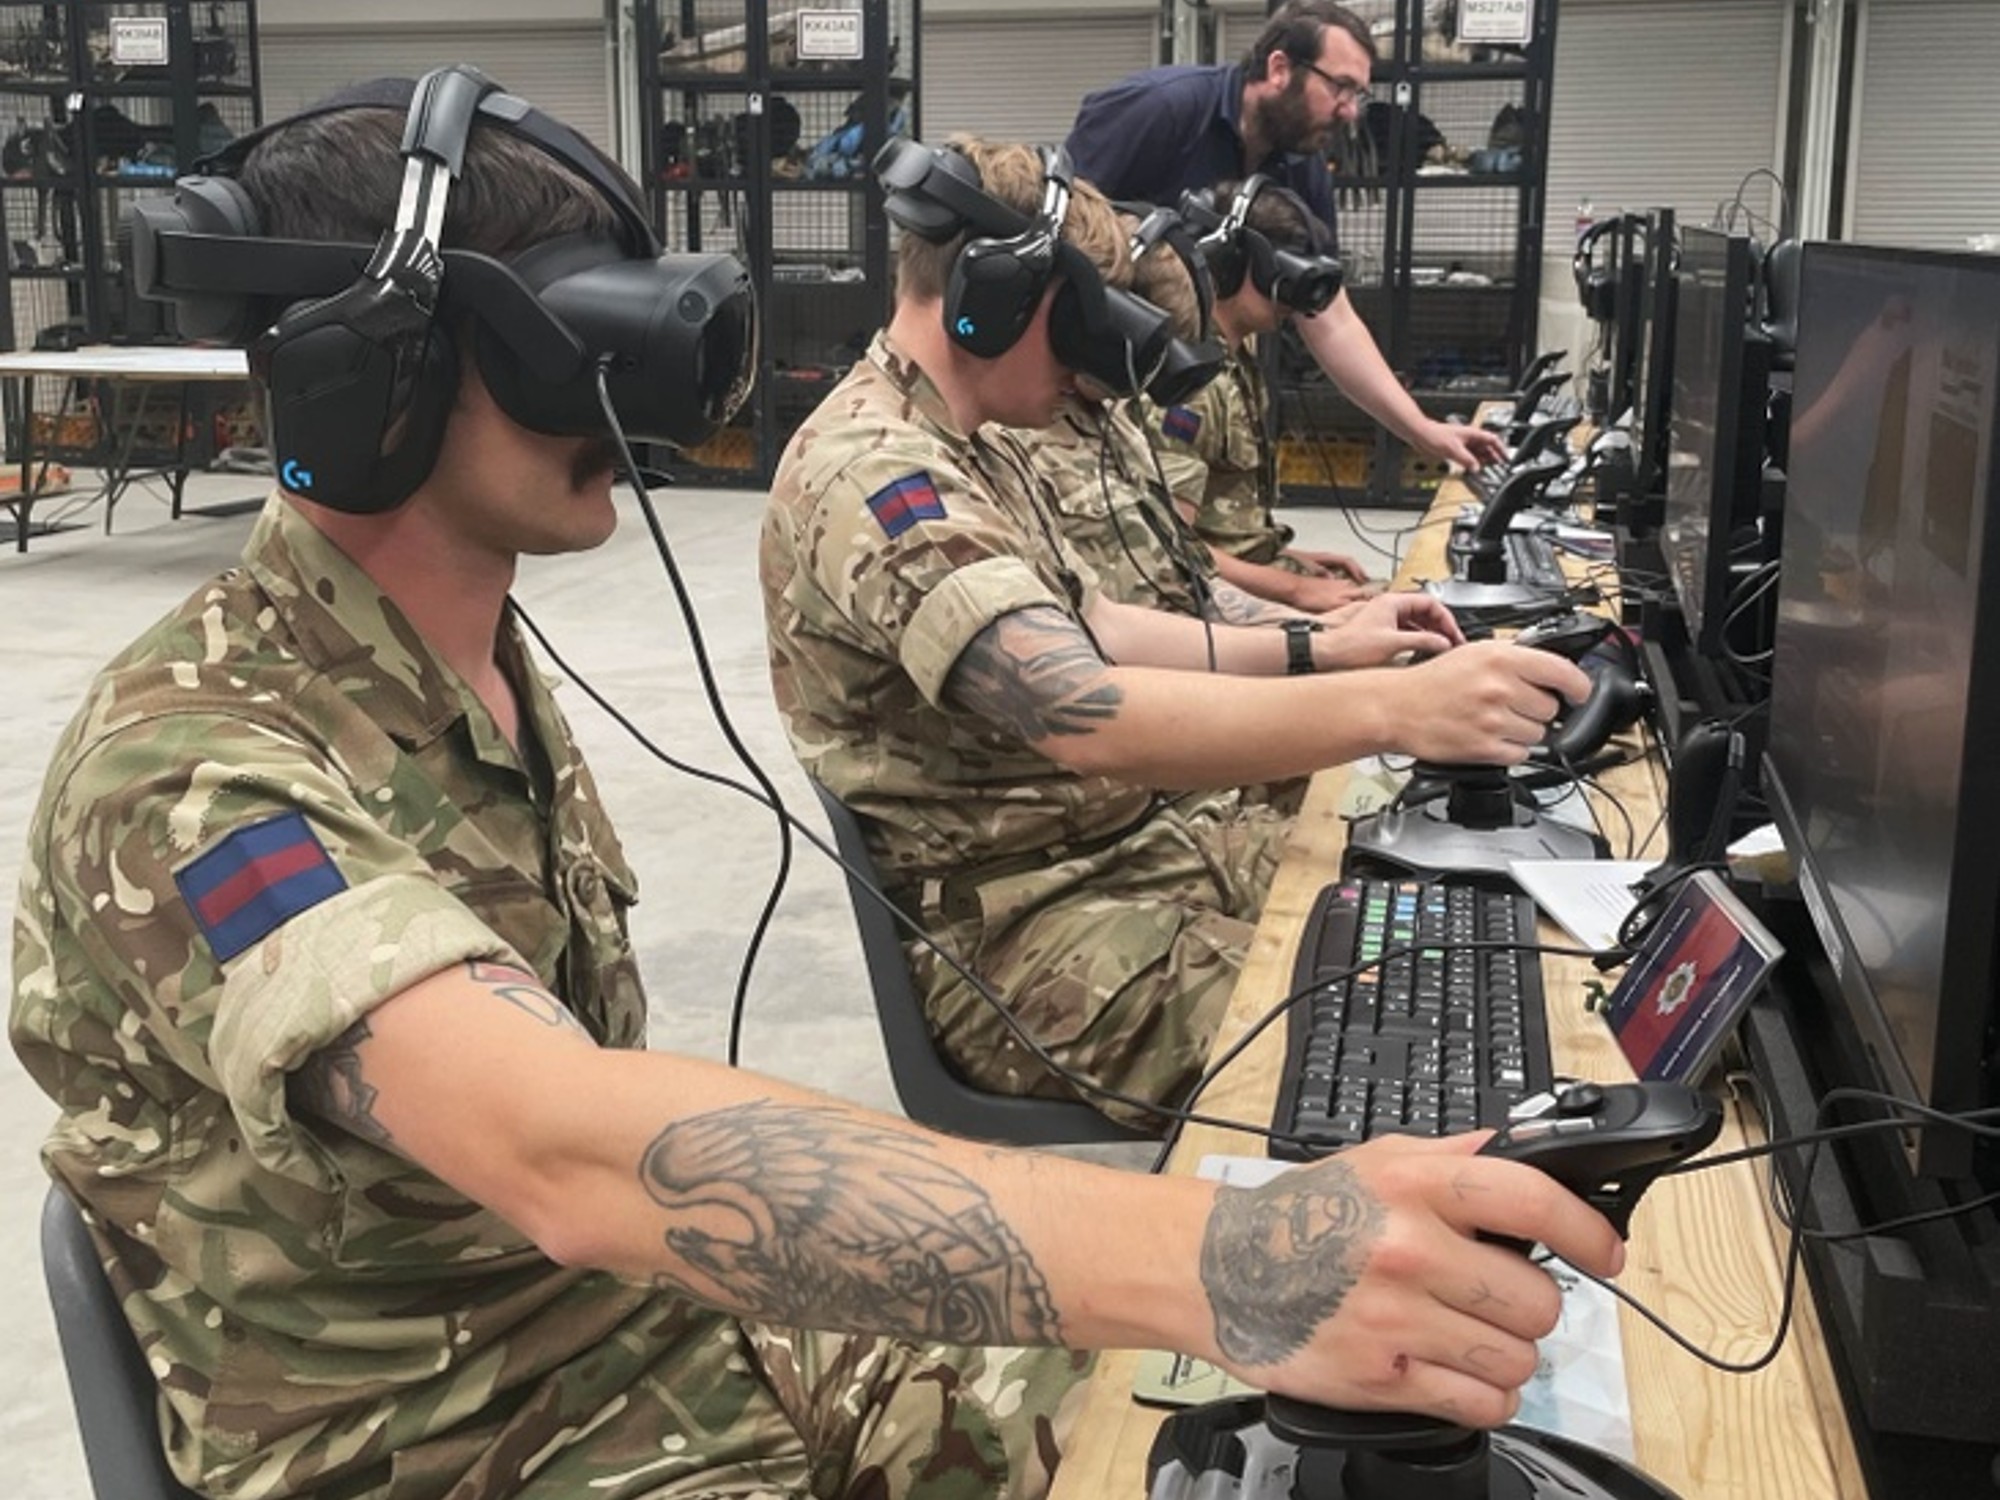 Soldiers immersed on Interim Combined Arms Virtual Simulation (Deployable) military training system. Photo: Elbit Systems